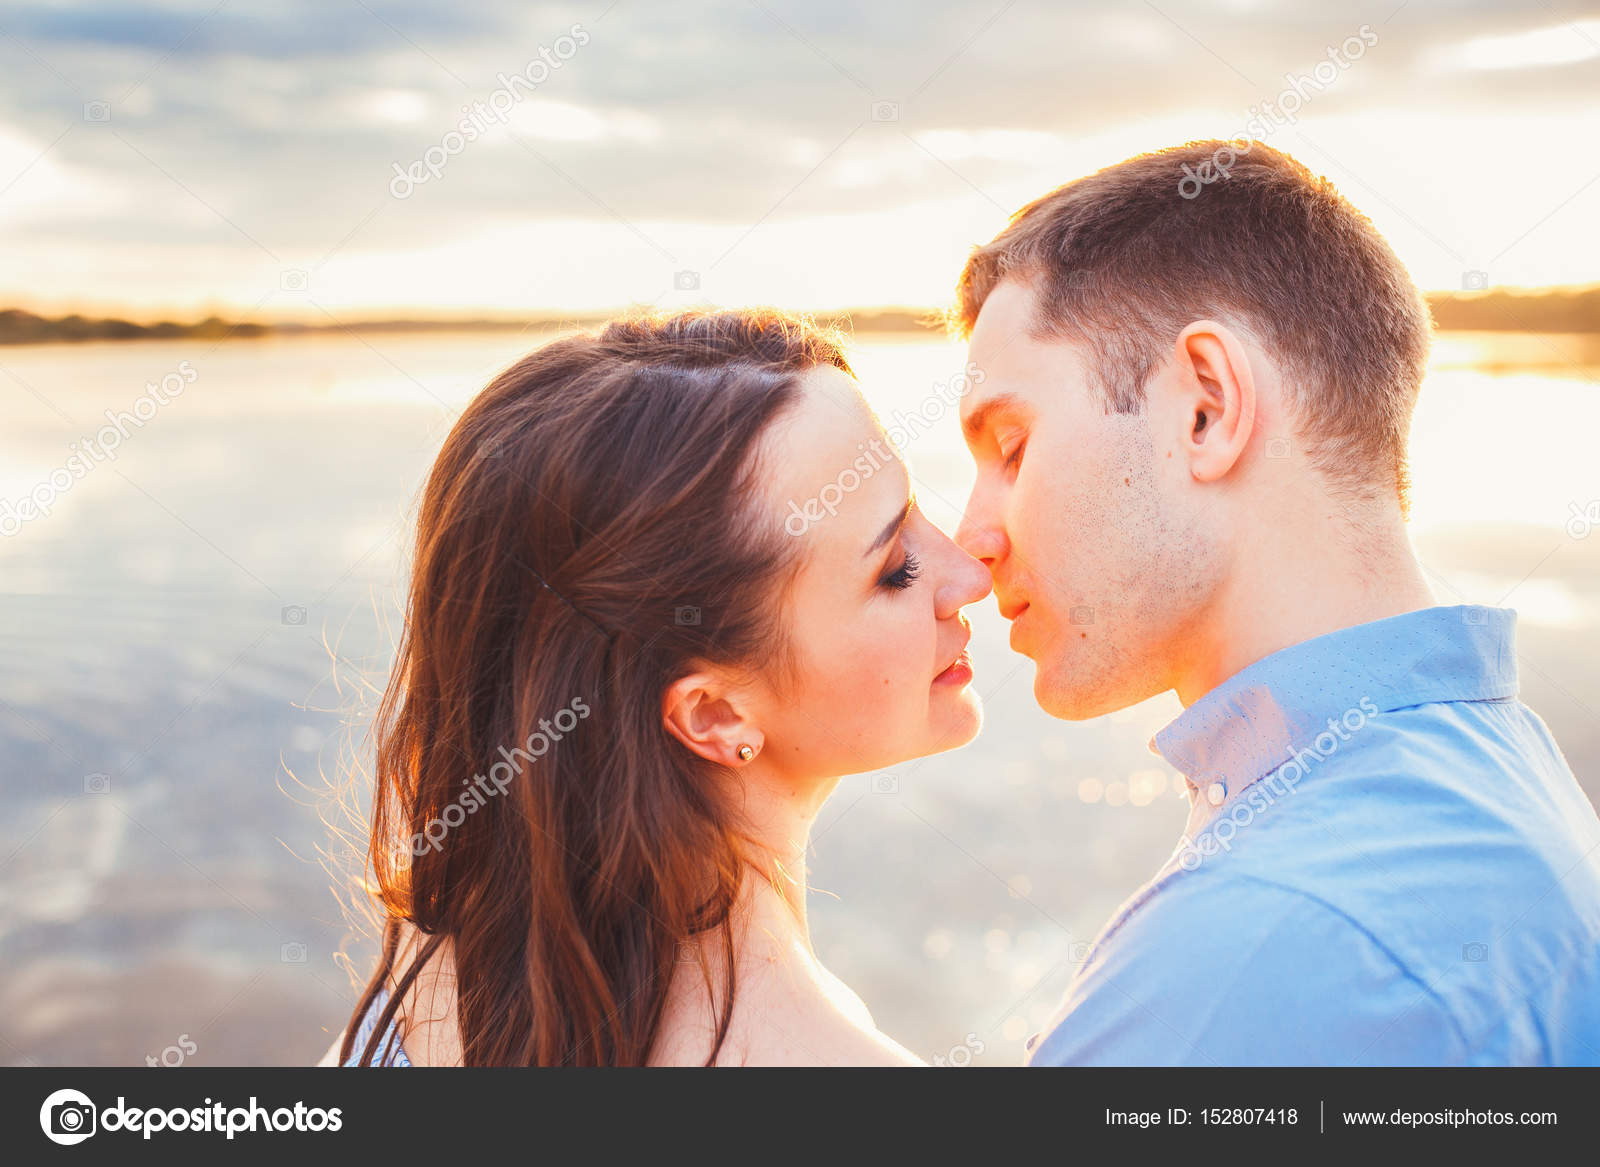 Young Beautiful Couple In Love Staying And Kissing On The Beach On